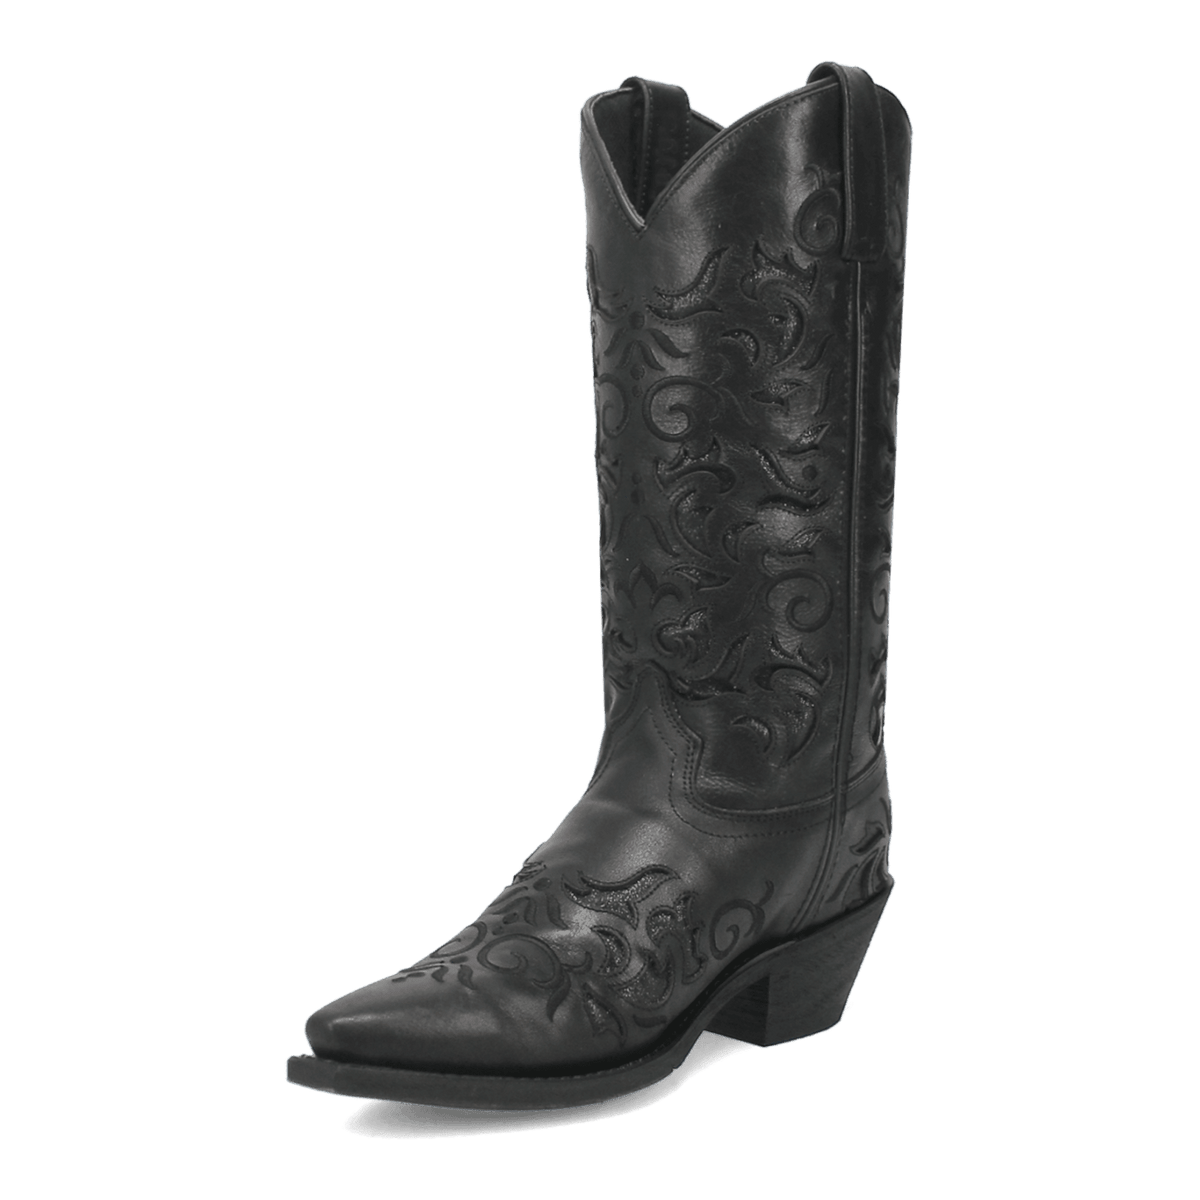 NIGHT SKY LEATHER BOOT Image